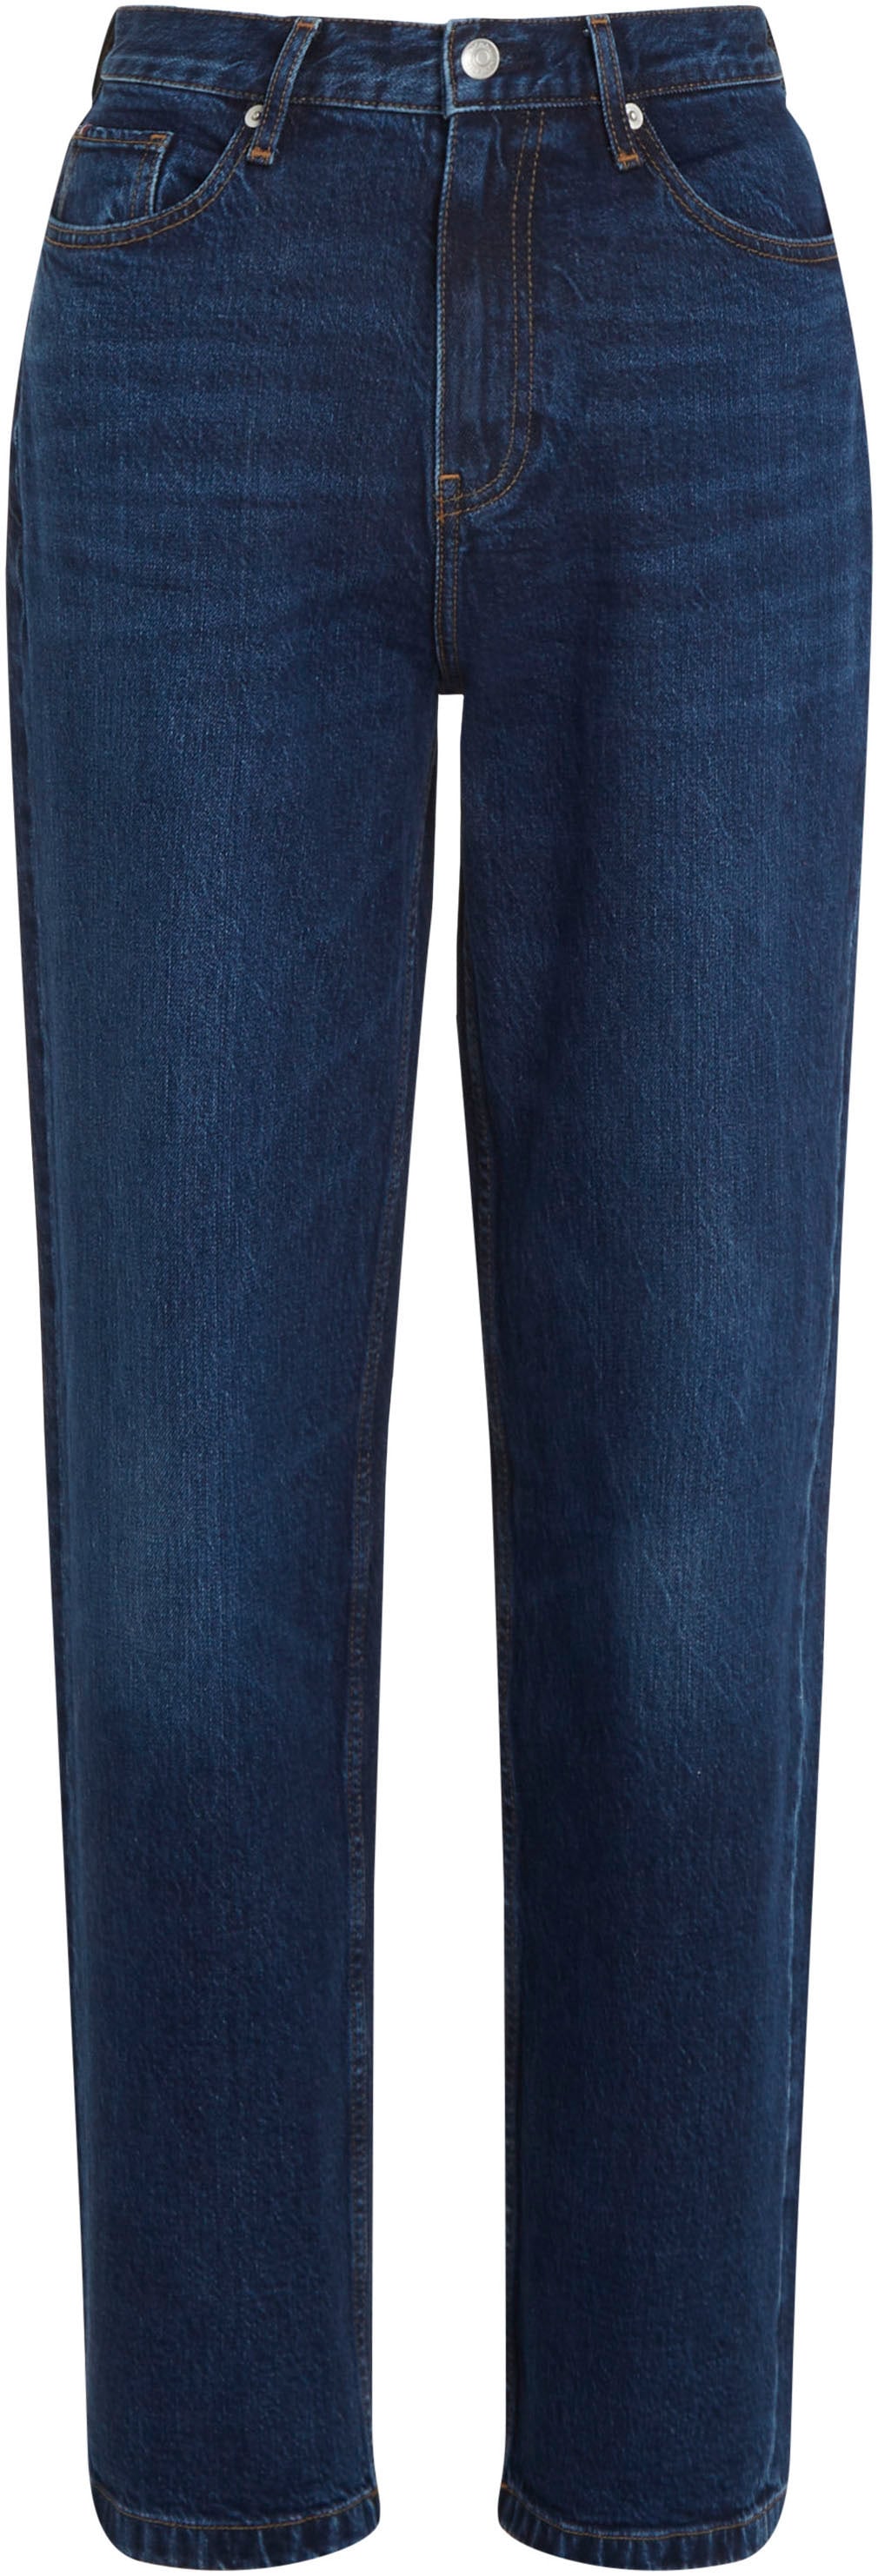 kaufen weißer in Waschung HW PAM«, Hilfiger Tommy STRAIGHT »RELAXED online Relax-fit-Jeans